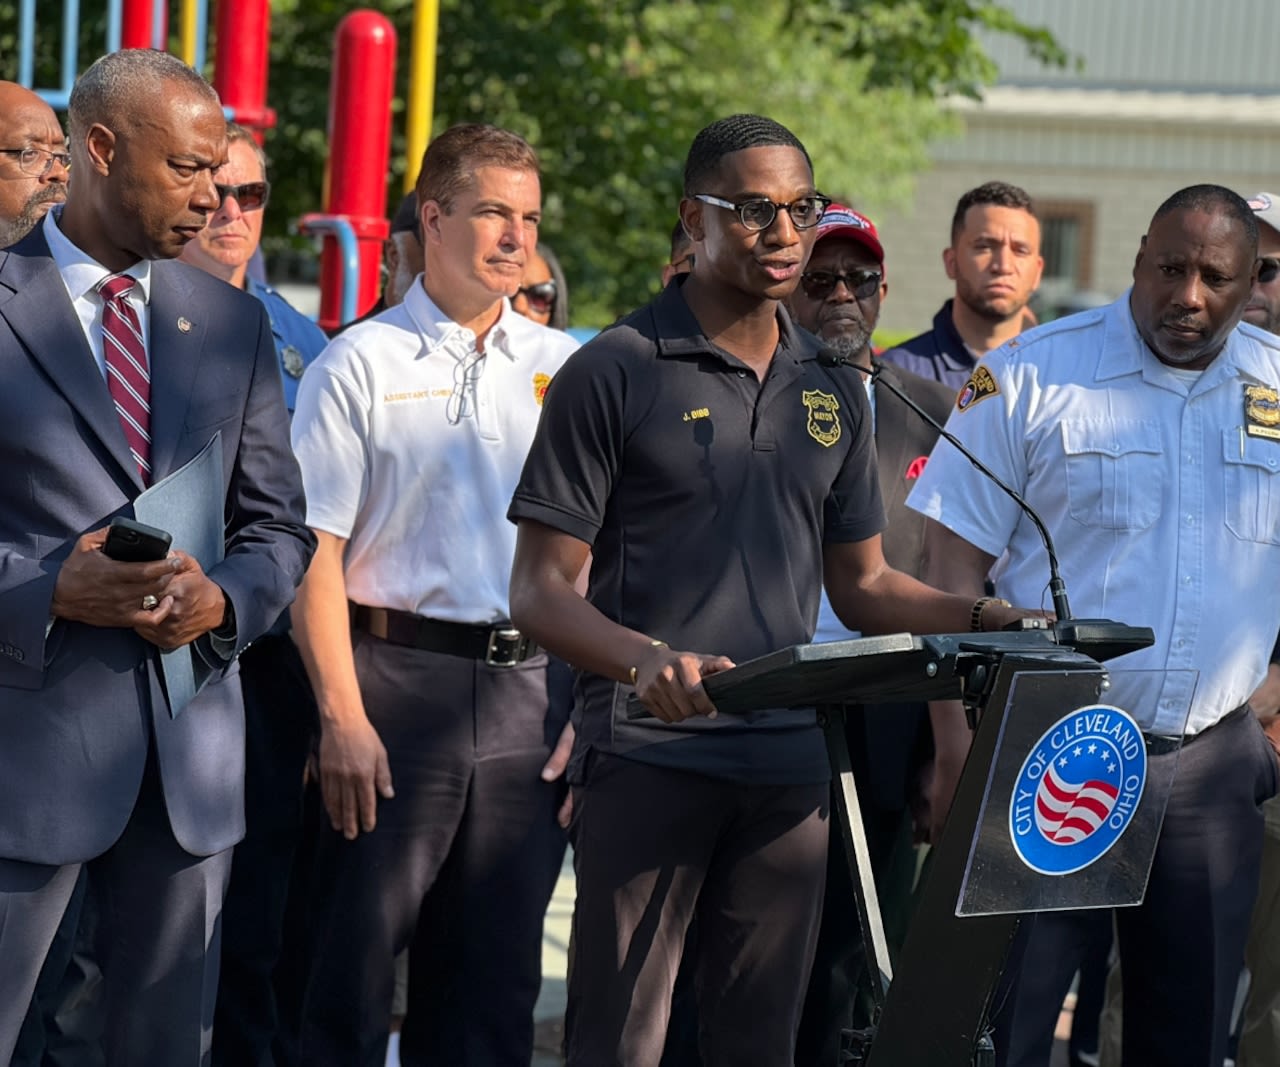 Cleveland’s top safety officials release summer safety initiatives to continue downward trend in violence